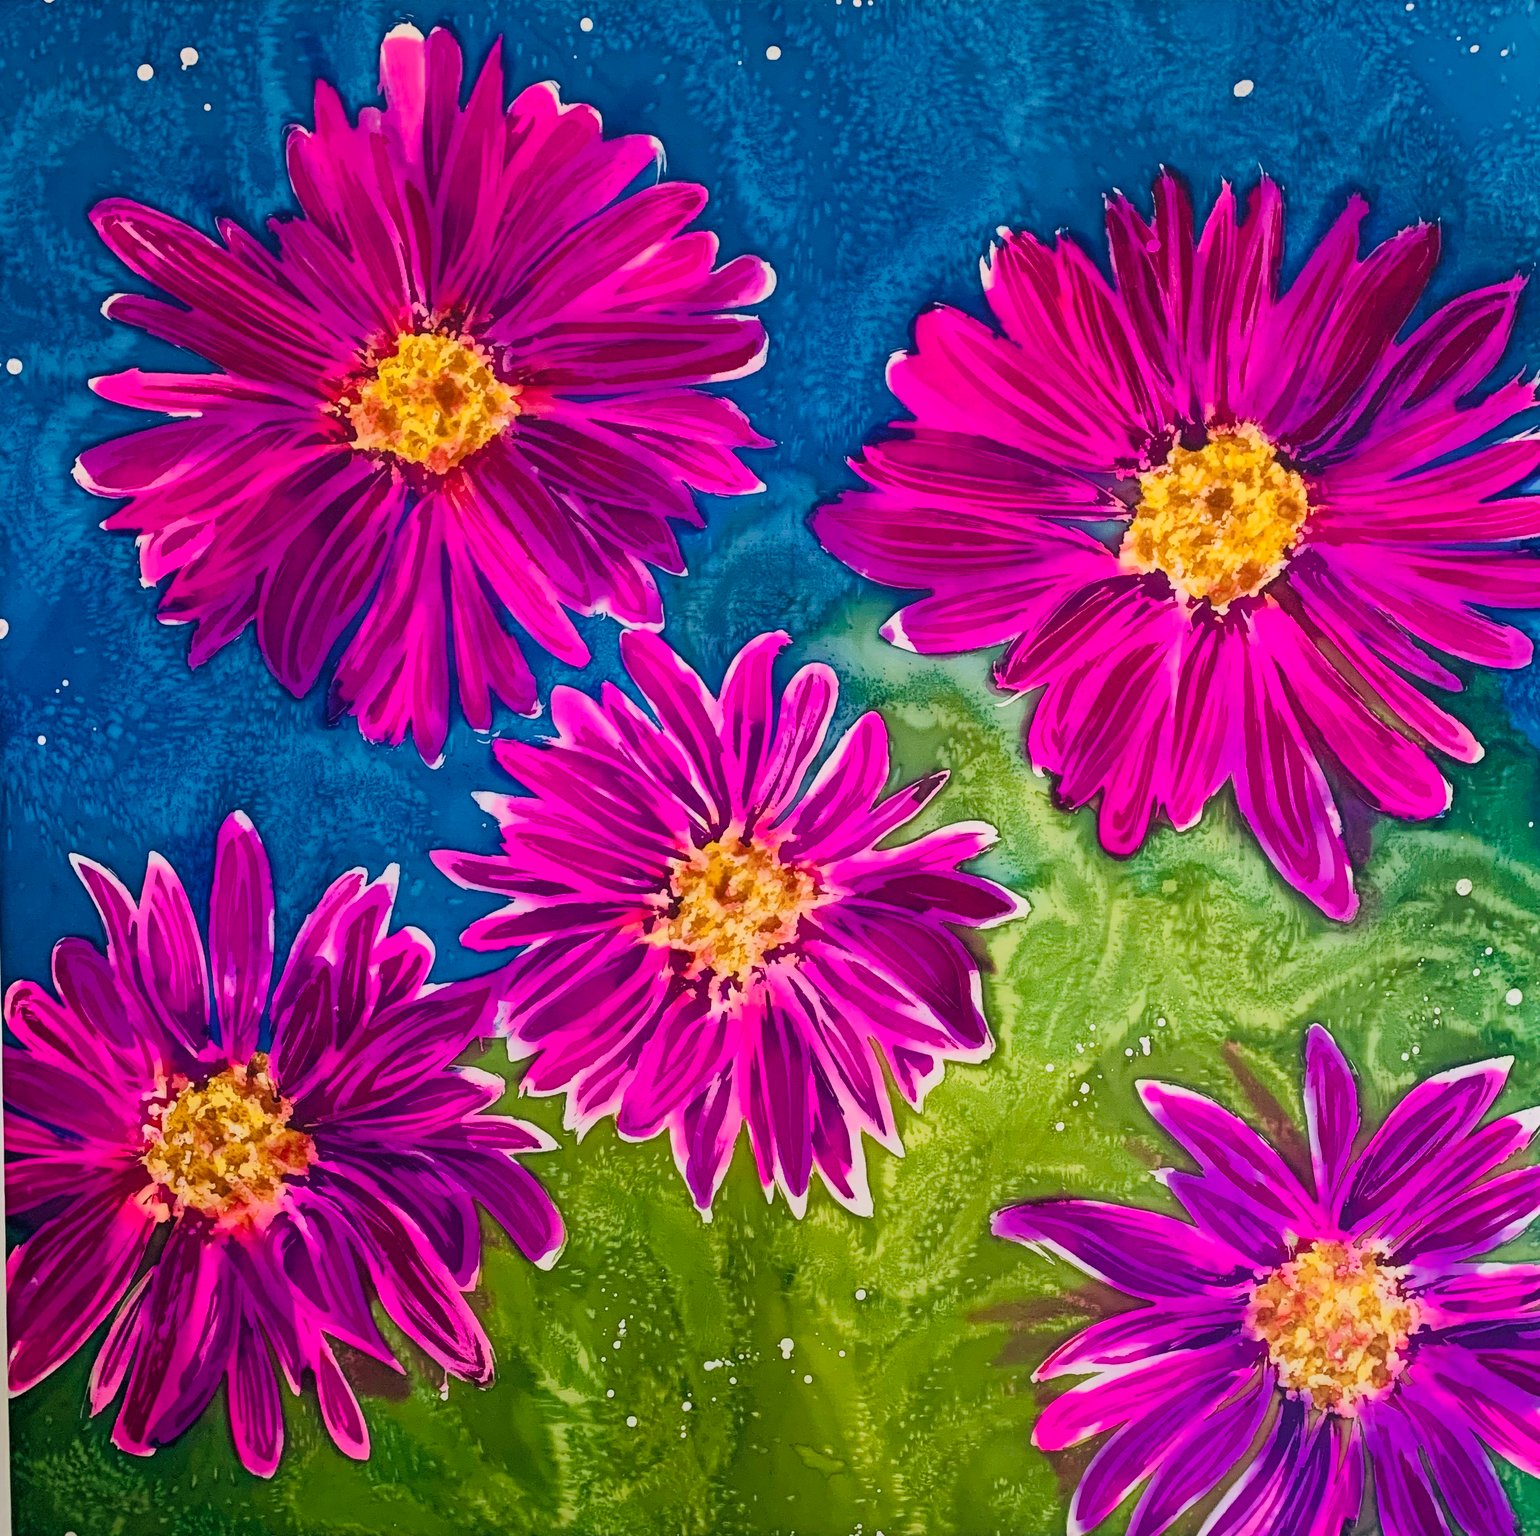 Image of Painted Daisies